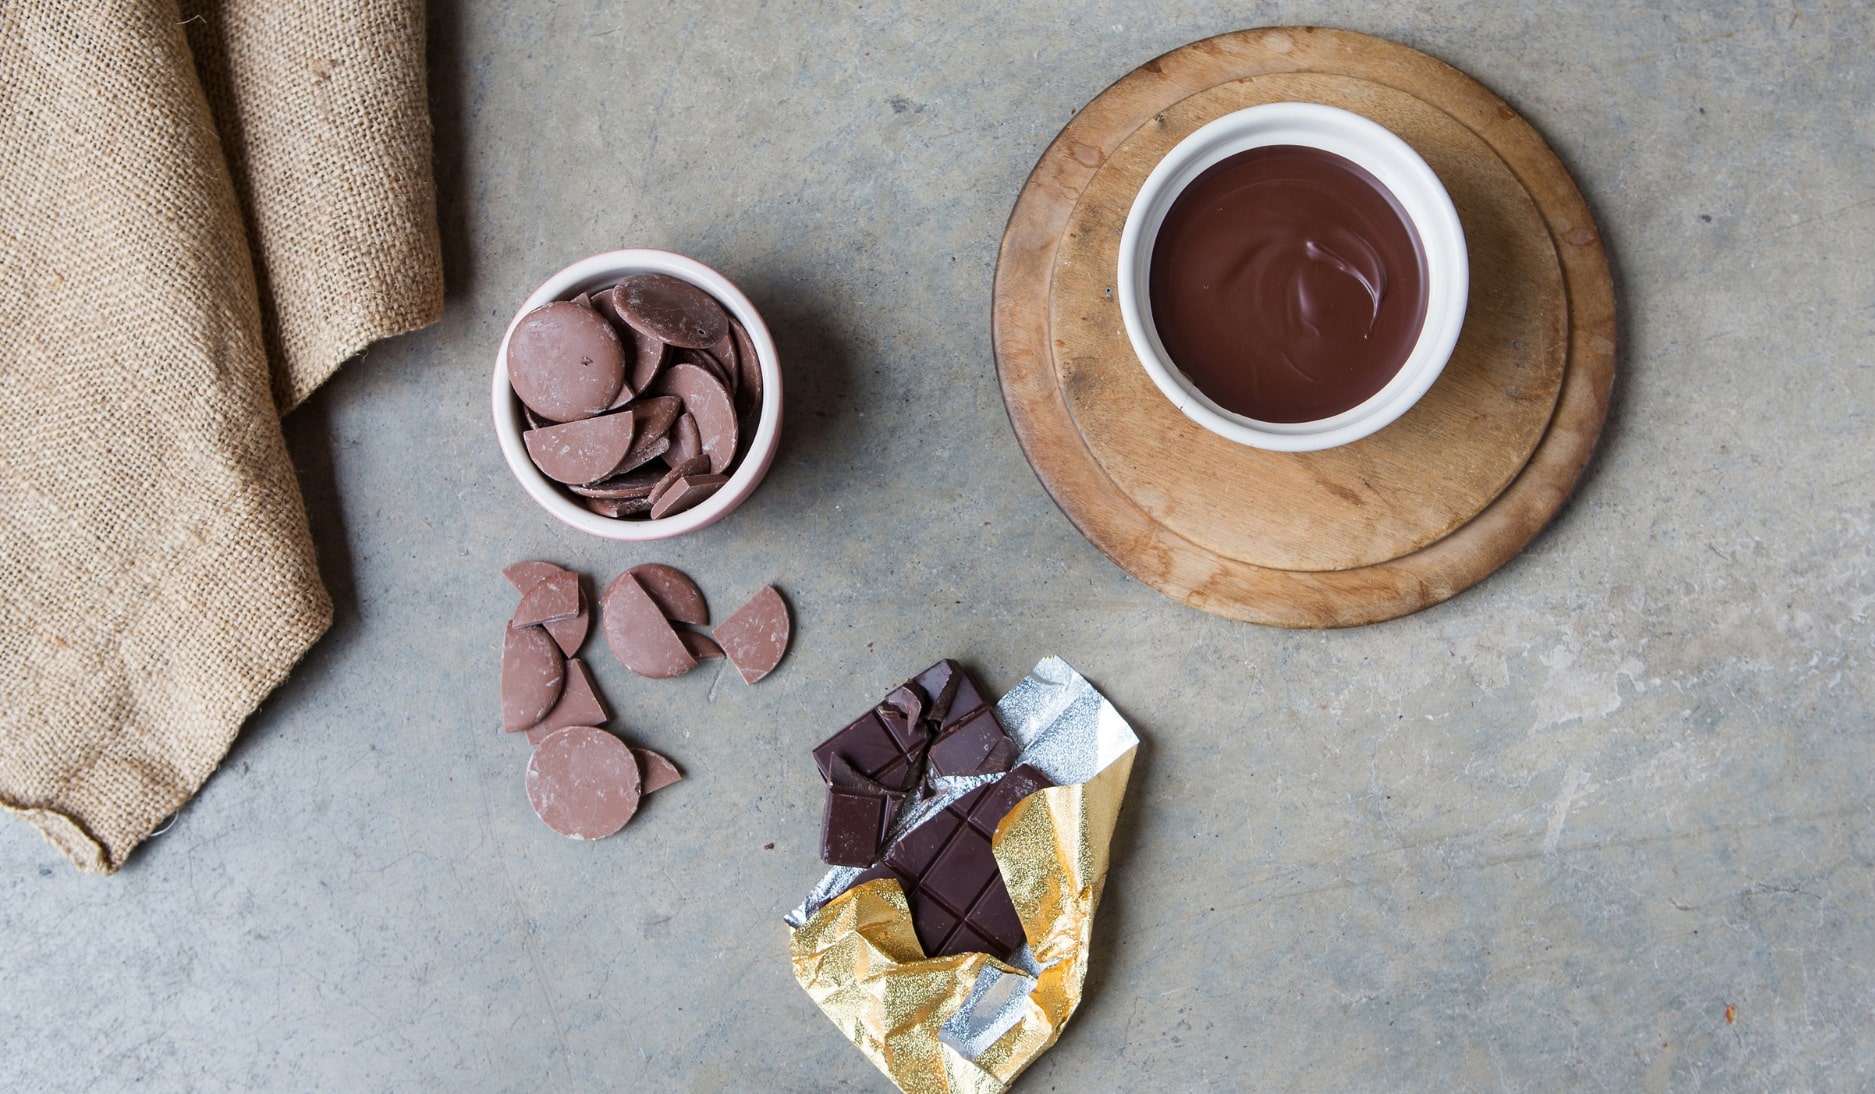 Bowl of melted chocolate next to a bowl of chocolate buttons